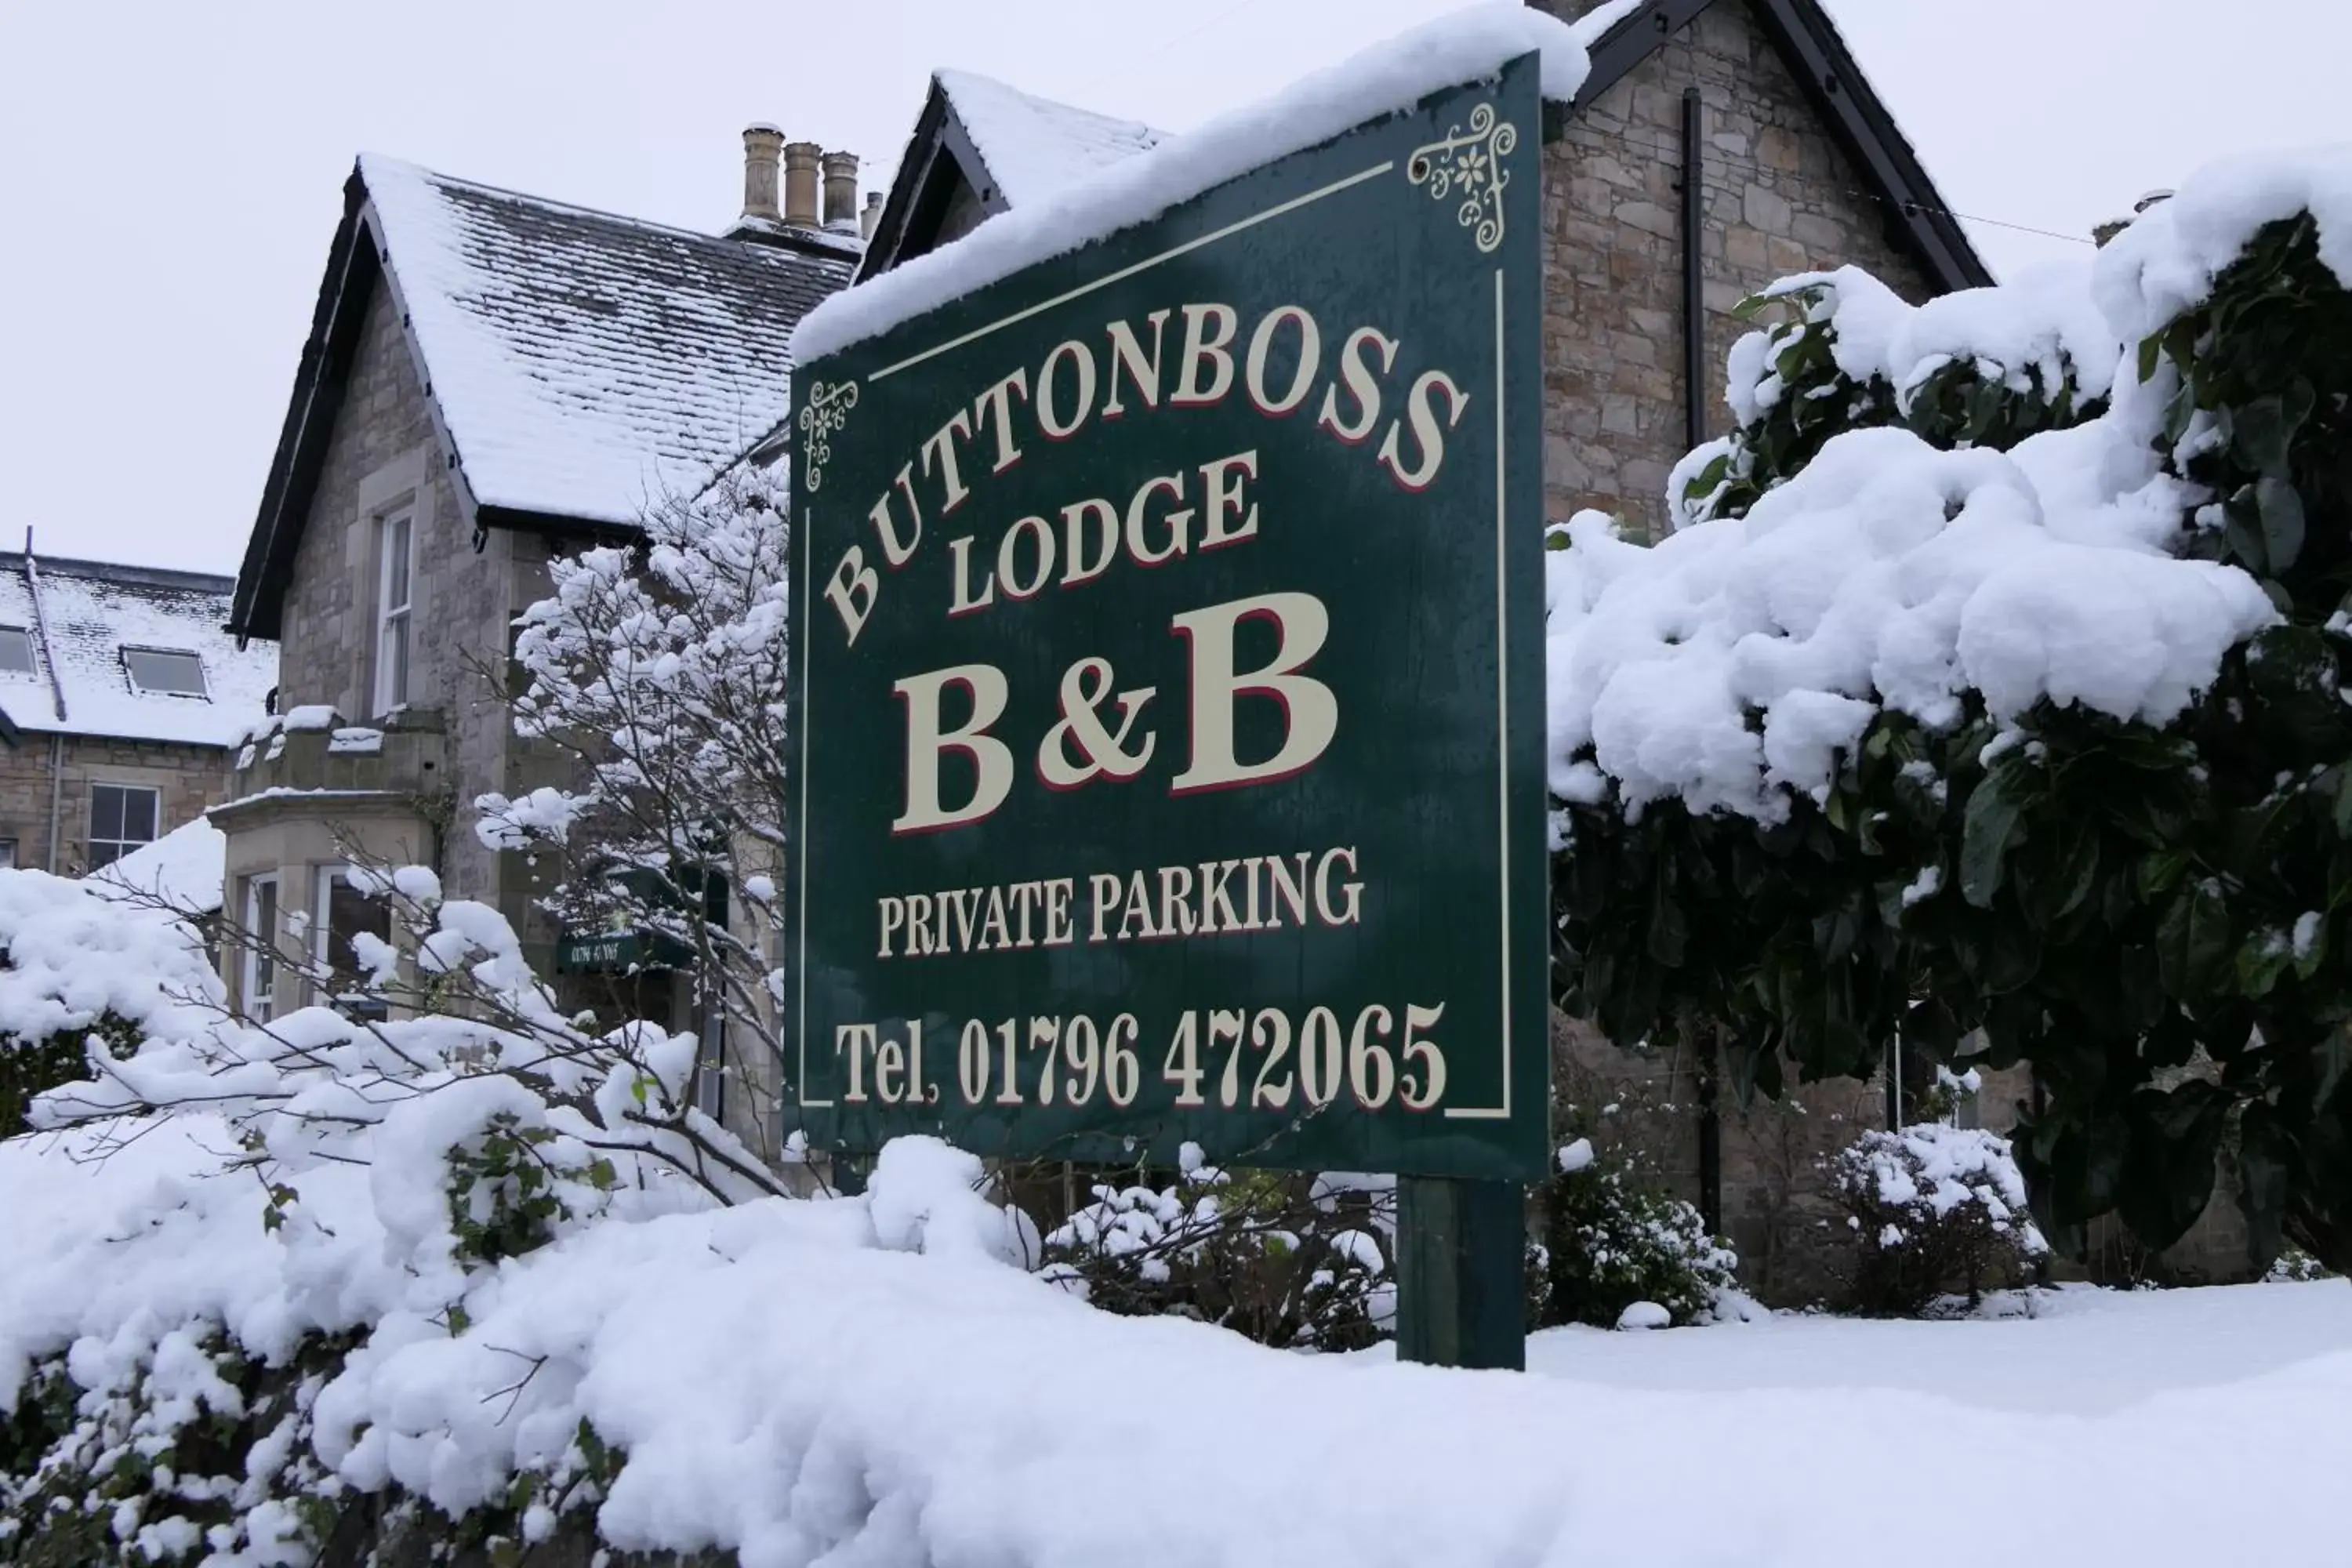 Property logo or sign, Winter in Buttonboss Lodge B&B